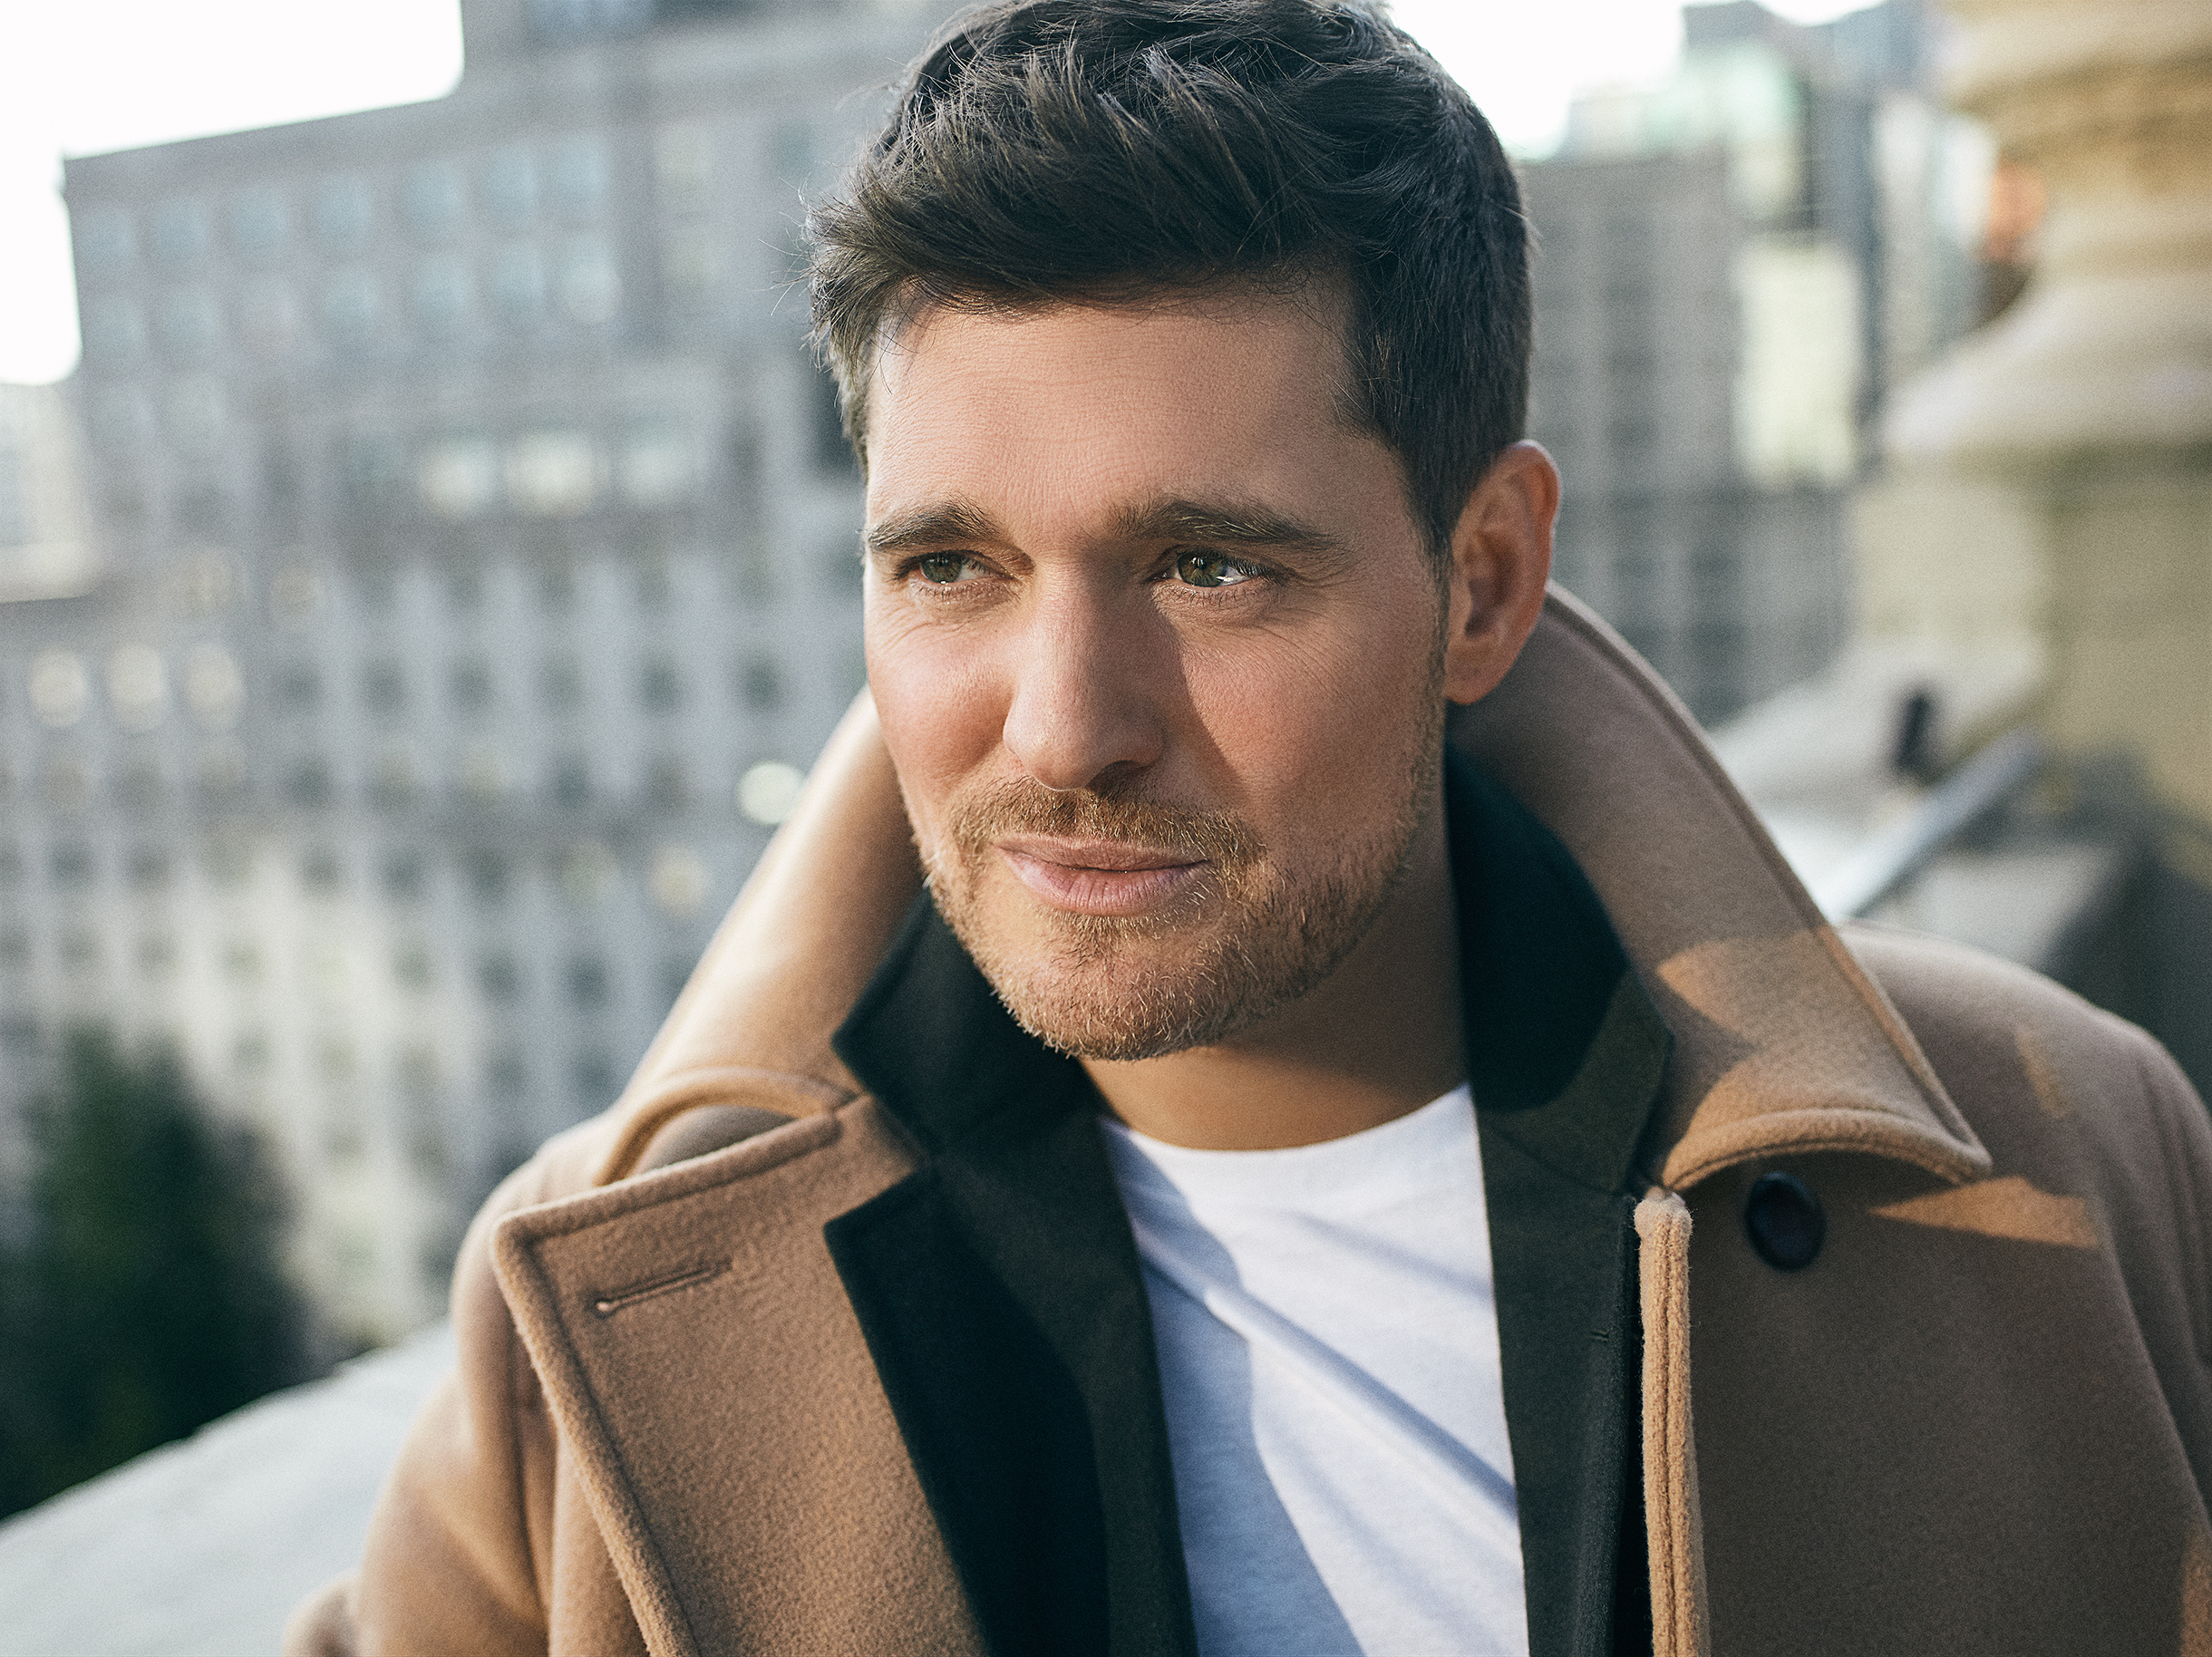 Michael Bublé Everything chords